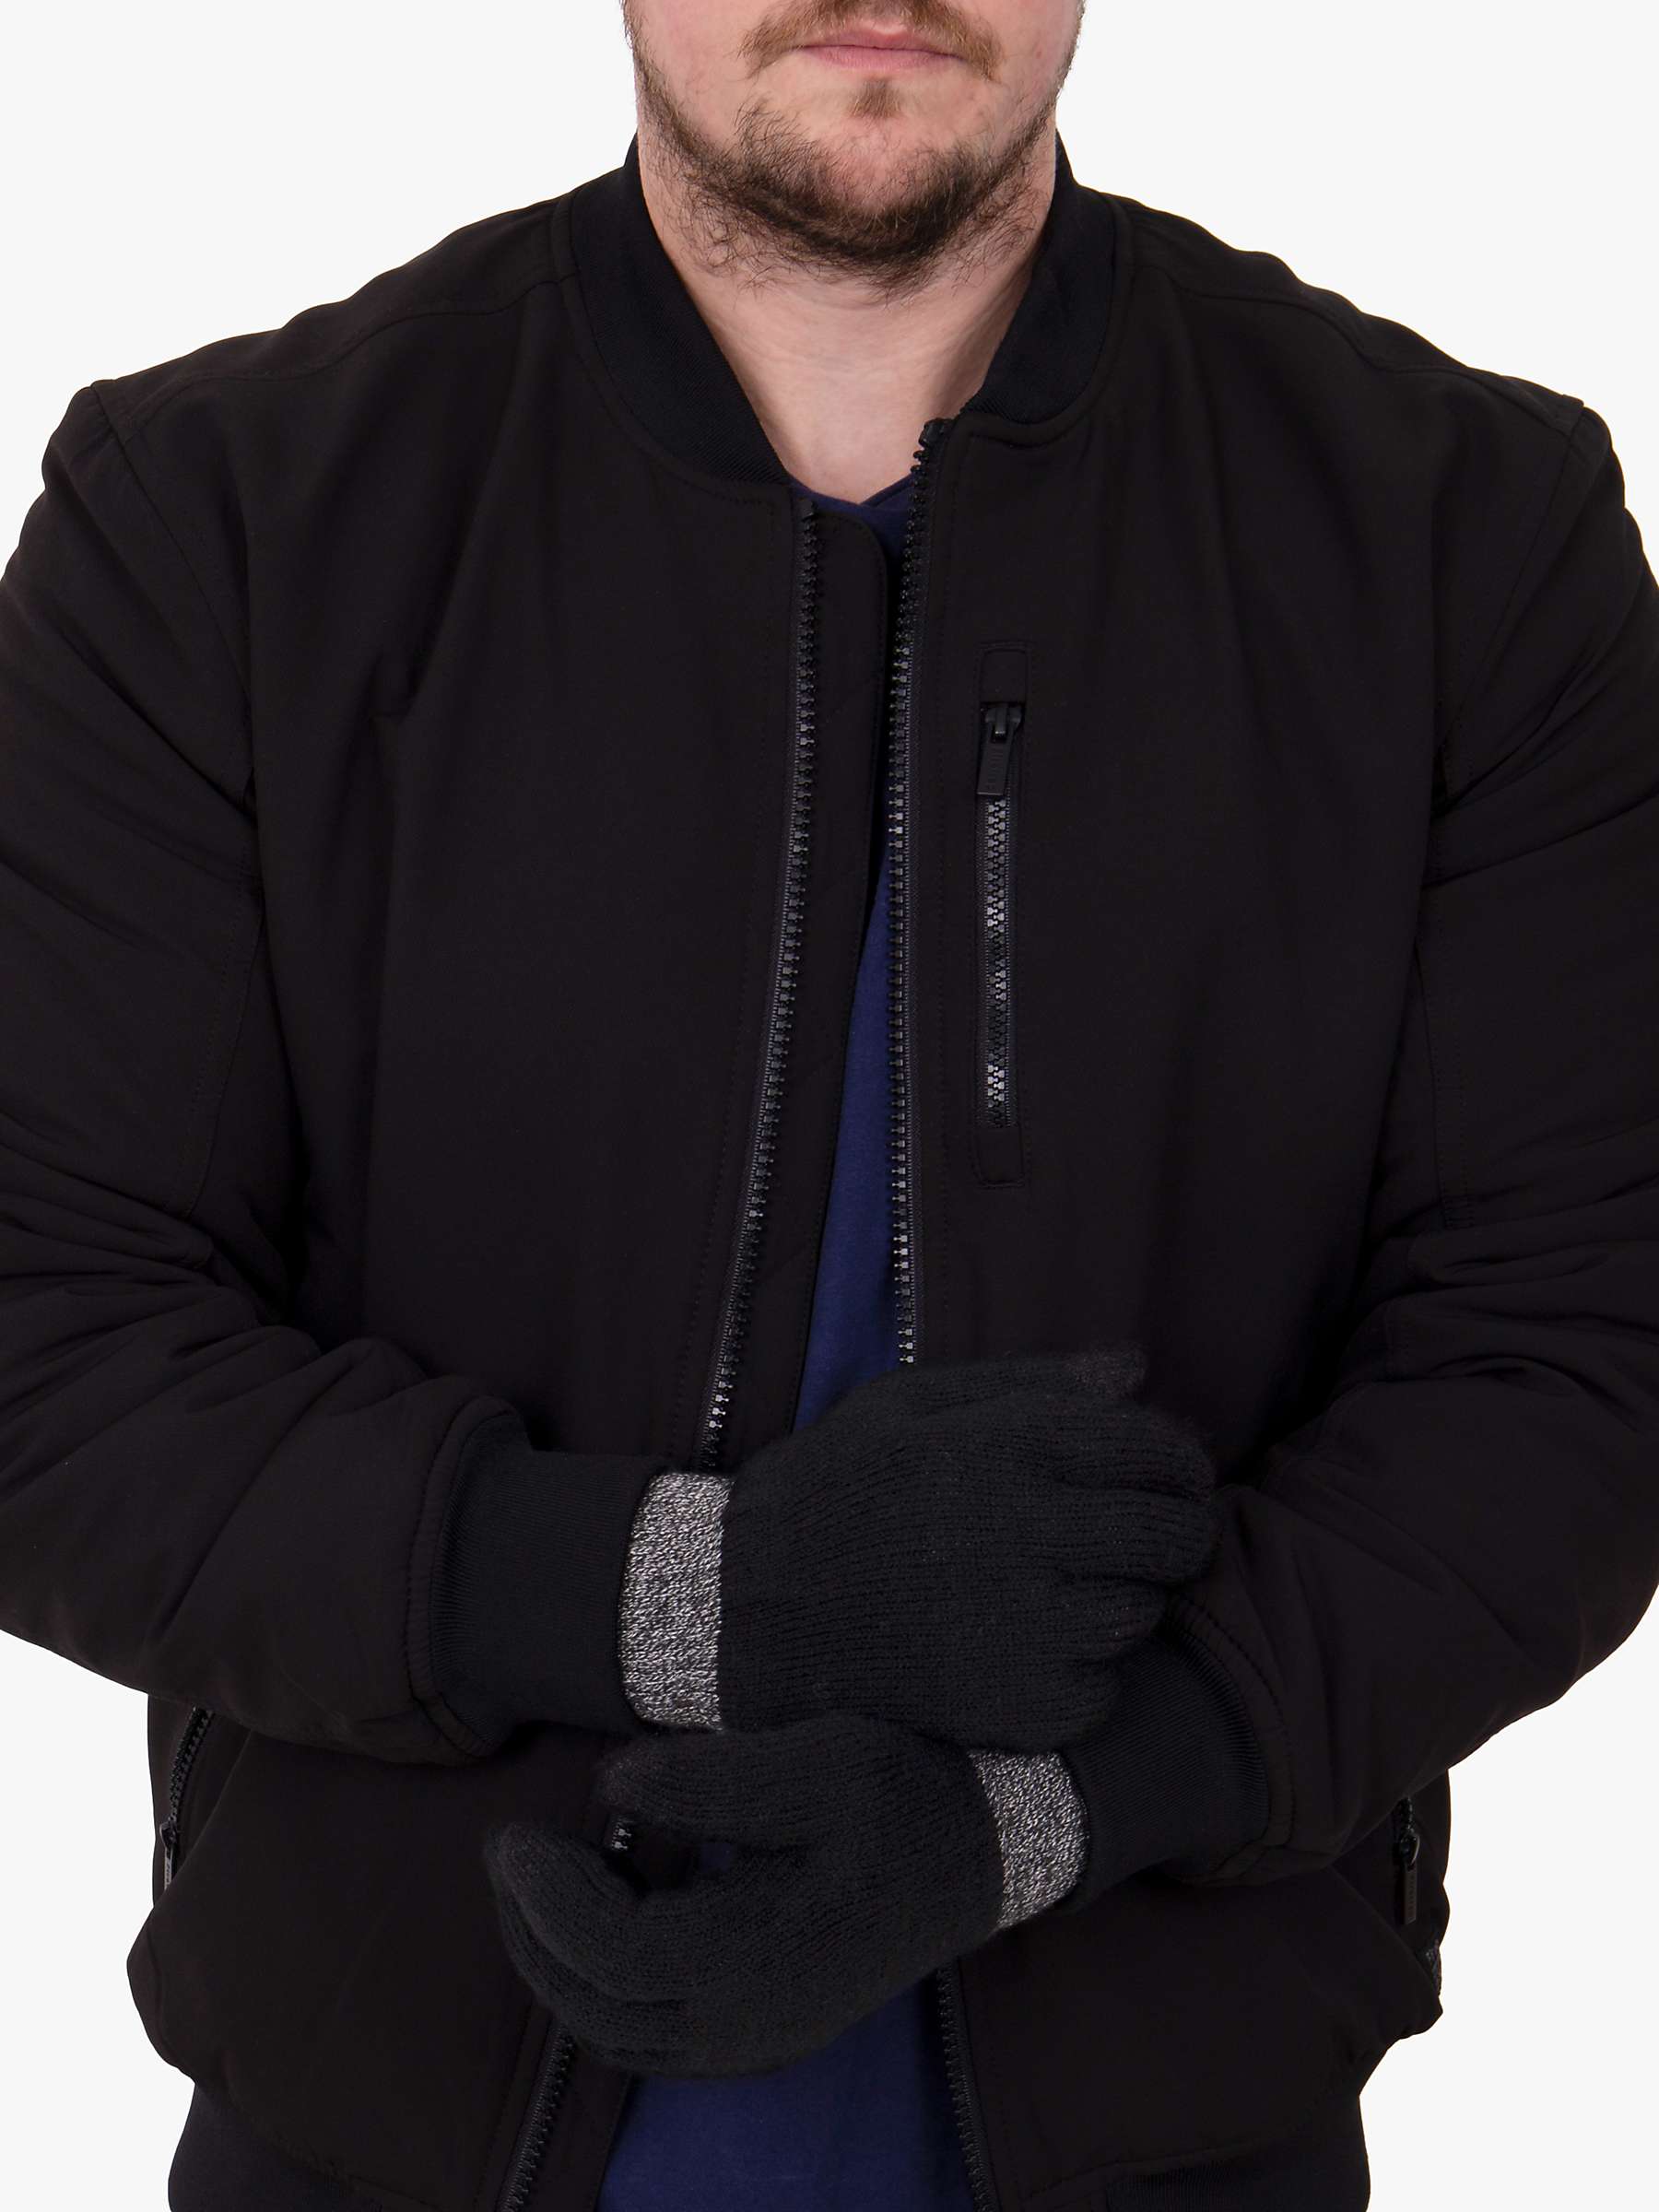 Buy totes Thermal Stretch Knitted Smartouch Gloves, Black Online at johnlewis.com